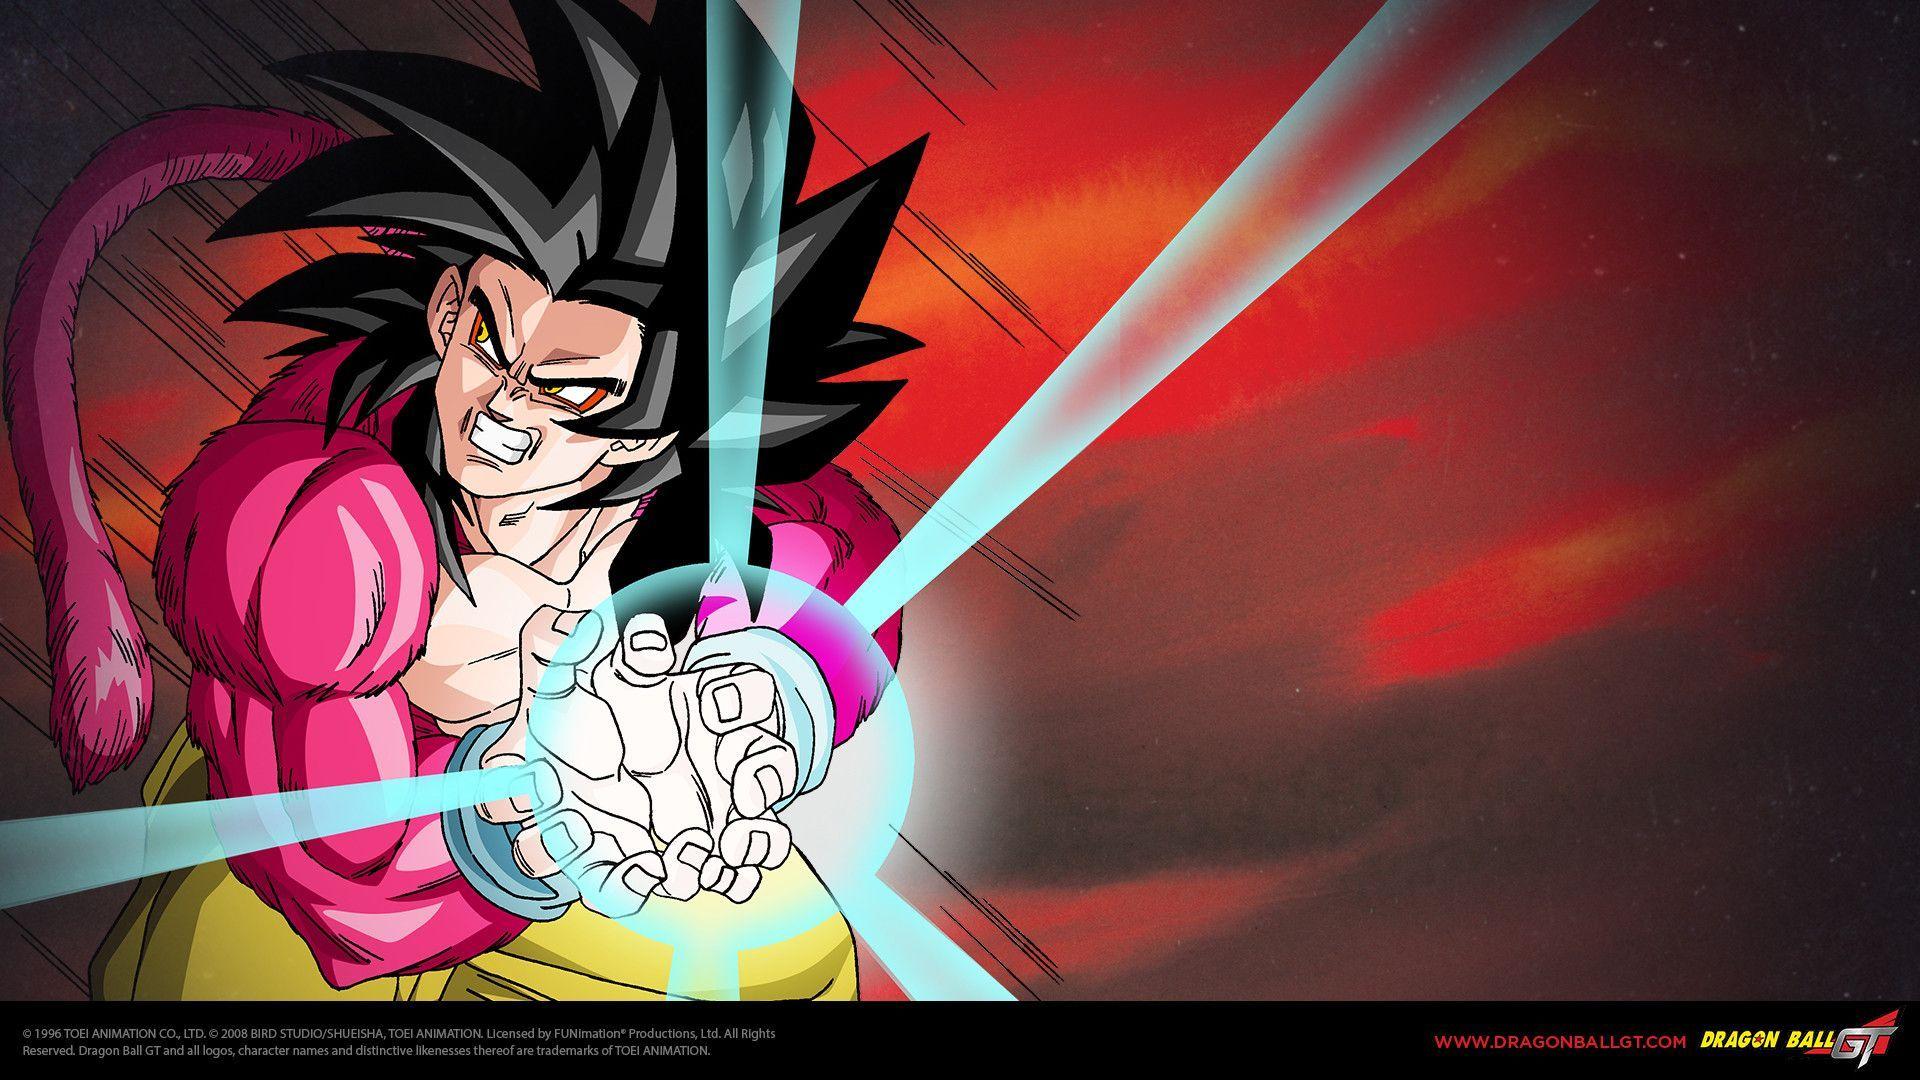 Creative Dragon Ball Z GT Picture in 4K Ultra HD